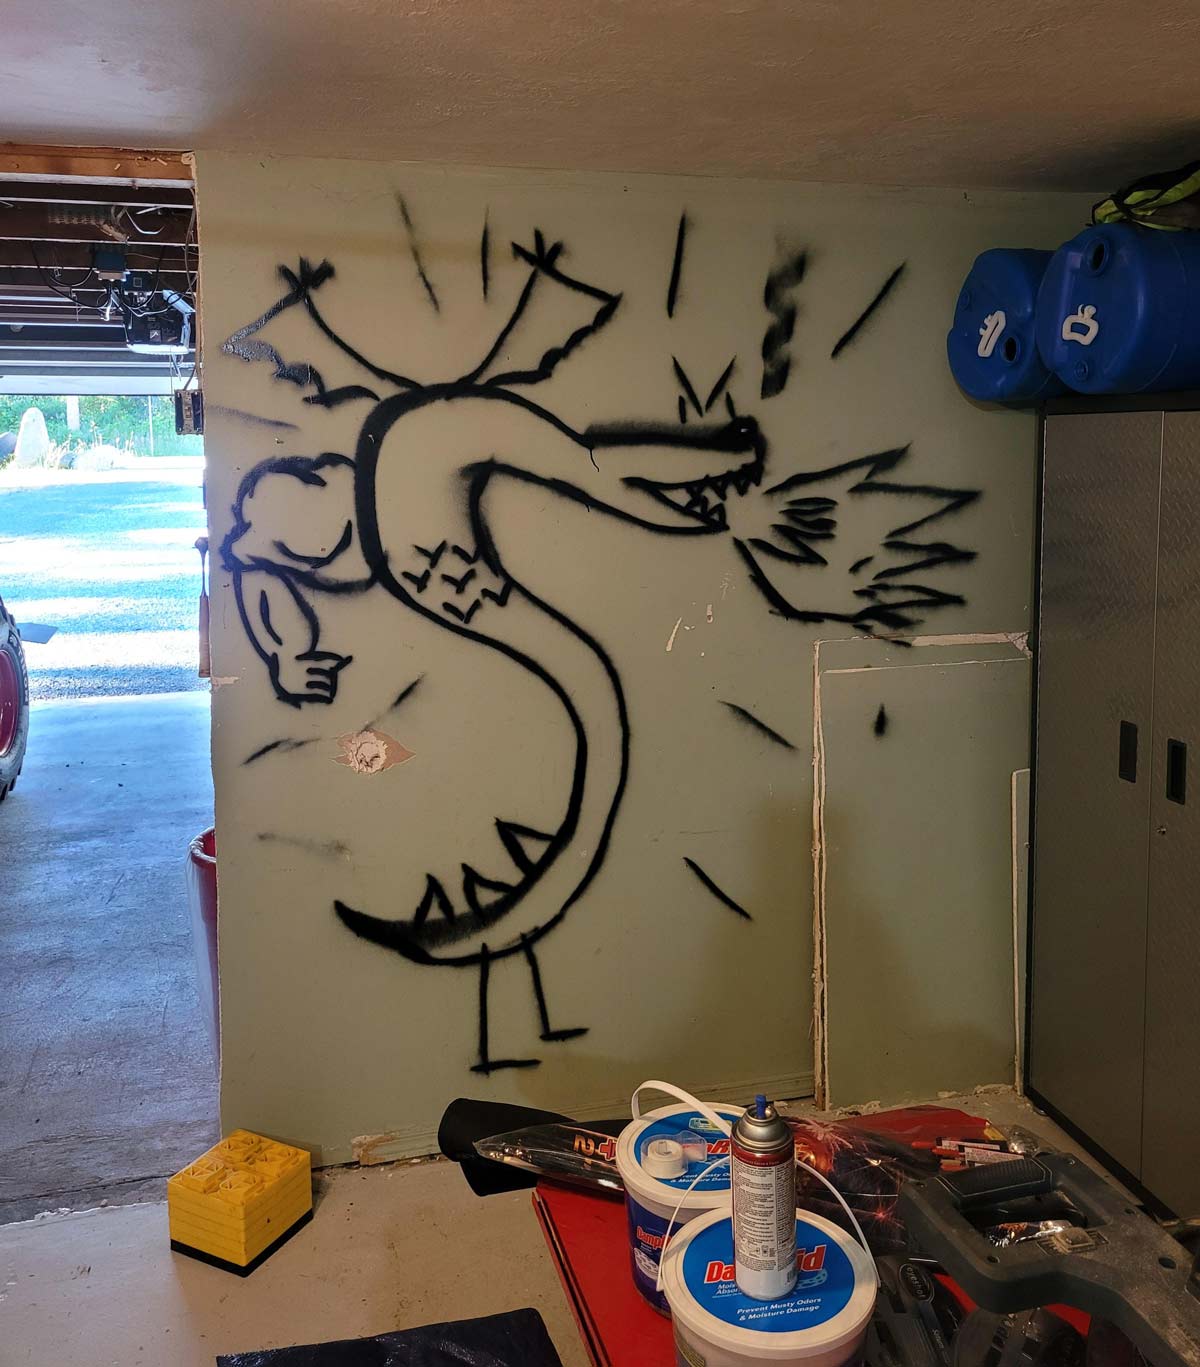 One perk of having a crappy garage is you can decorate however you want